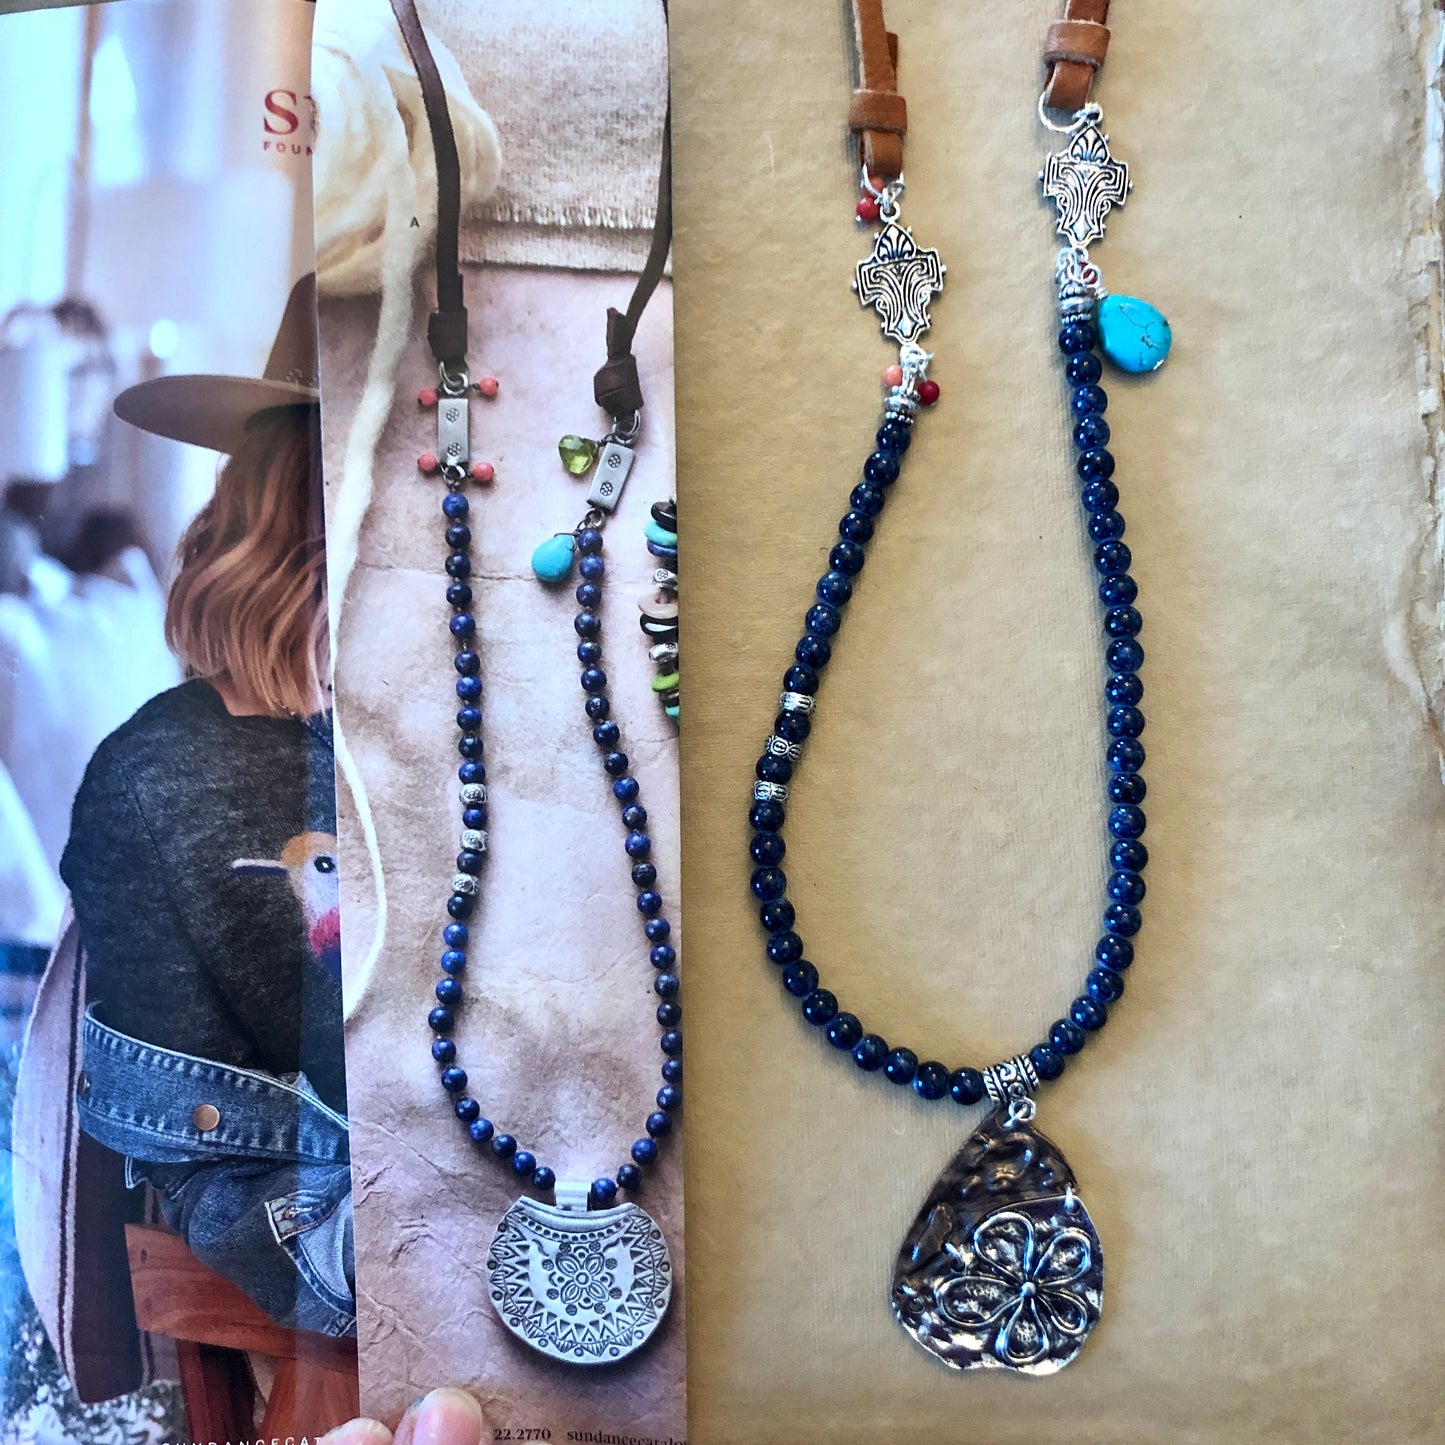 Get the Look, Sundance Inspired Jewelry Set - Purchase the Set or Separately